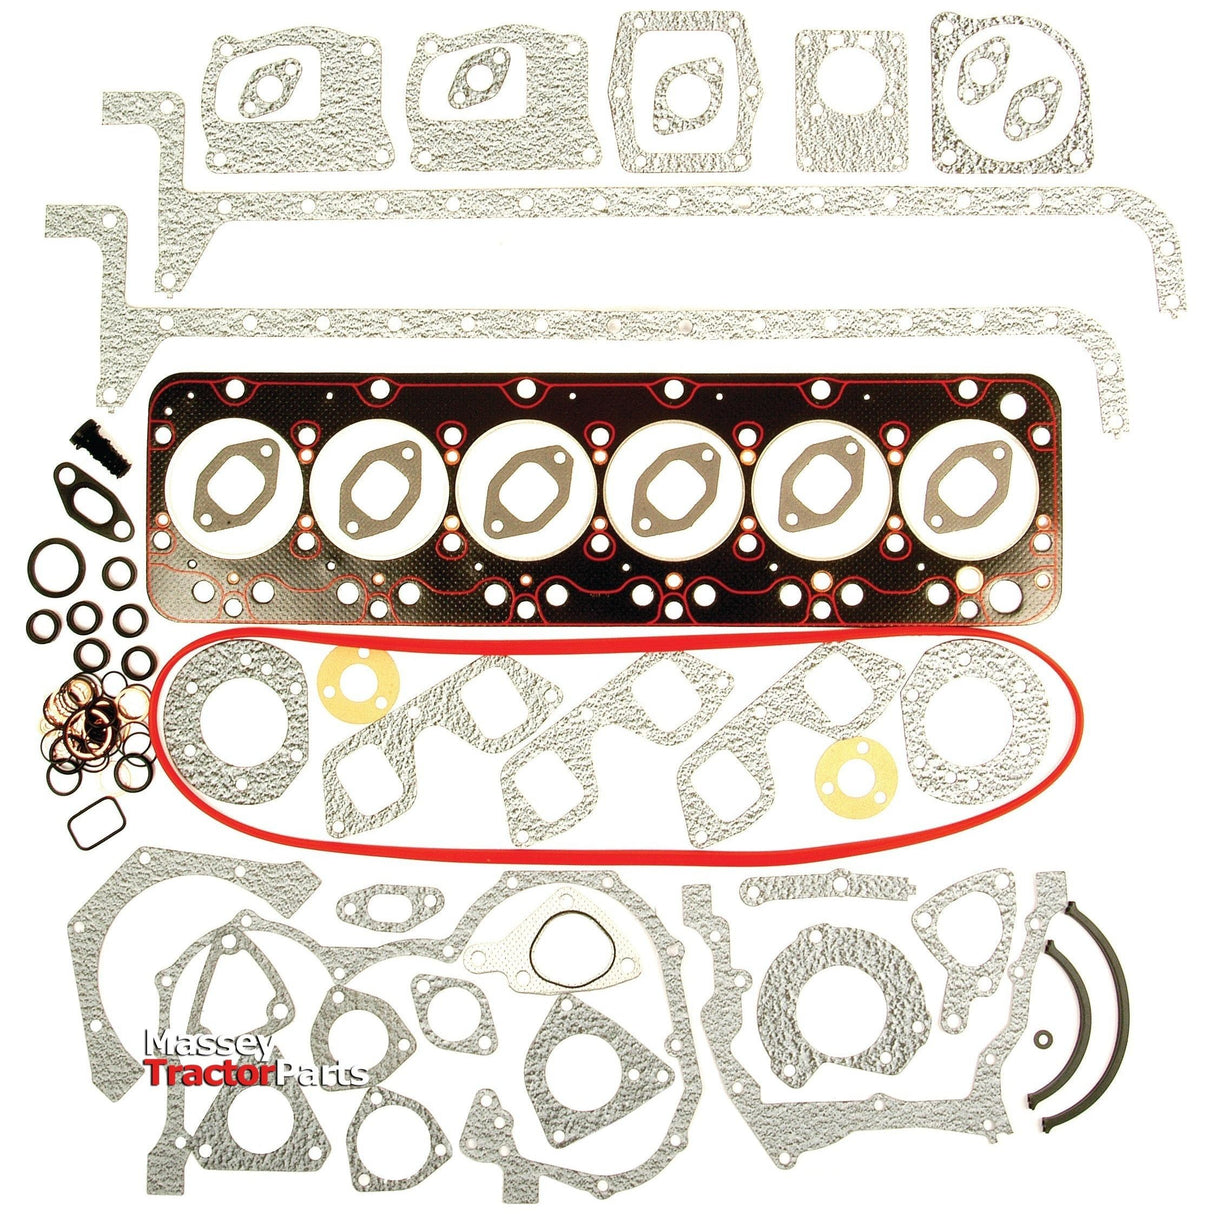 Complete Gasket Set - 6 Cyl. (8065.06)
 - S.62109 - Massey Tractor Parts